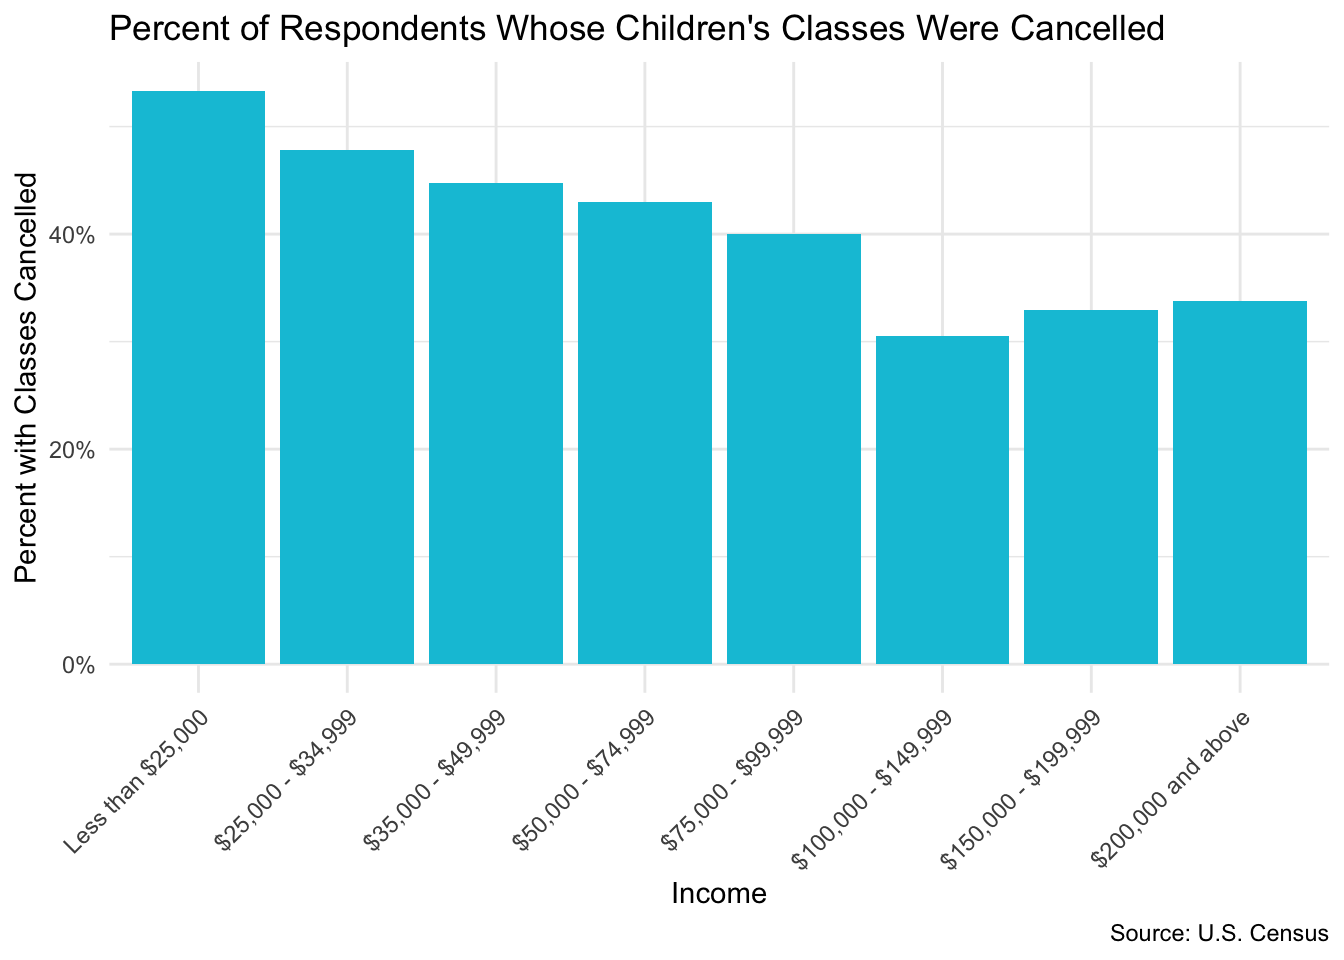 Barplot showing percent of classes that were cancelled by income group, with lower income groups more likely to report cancelled classes